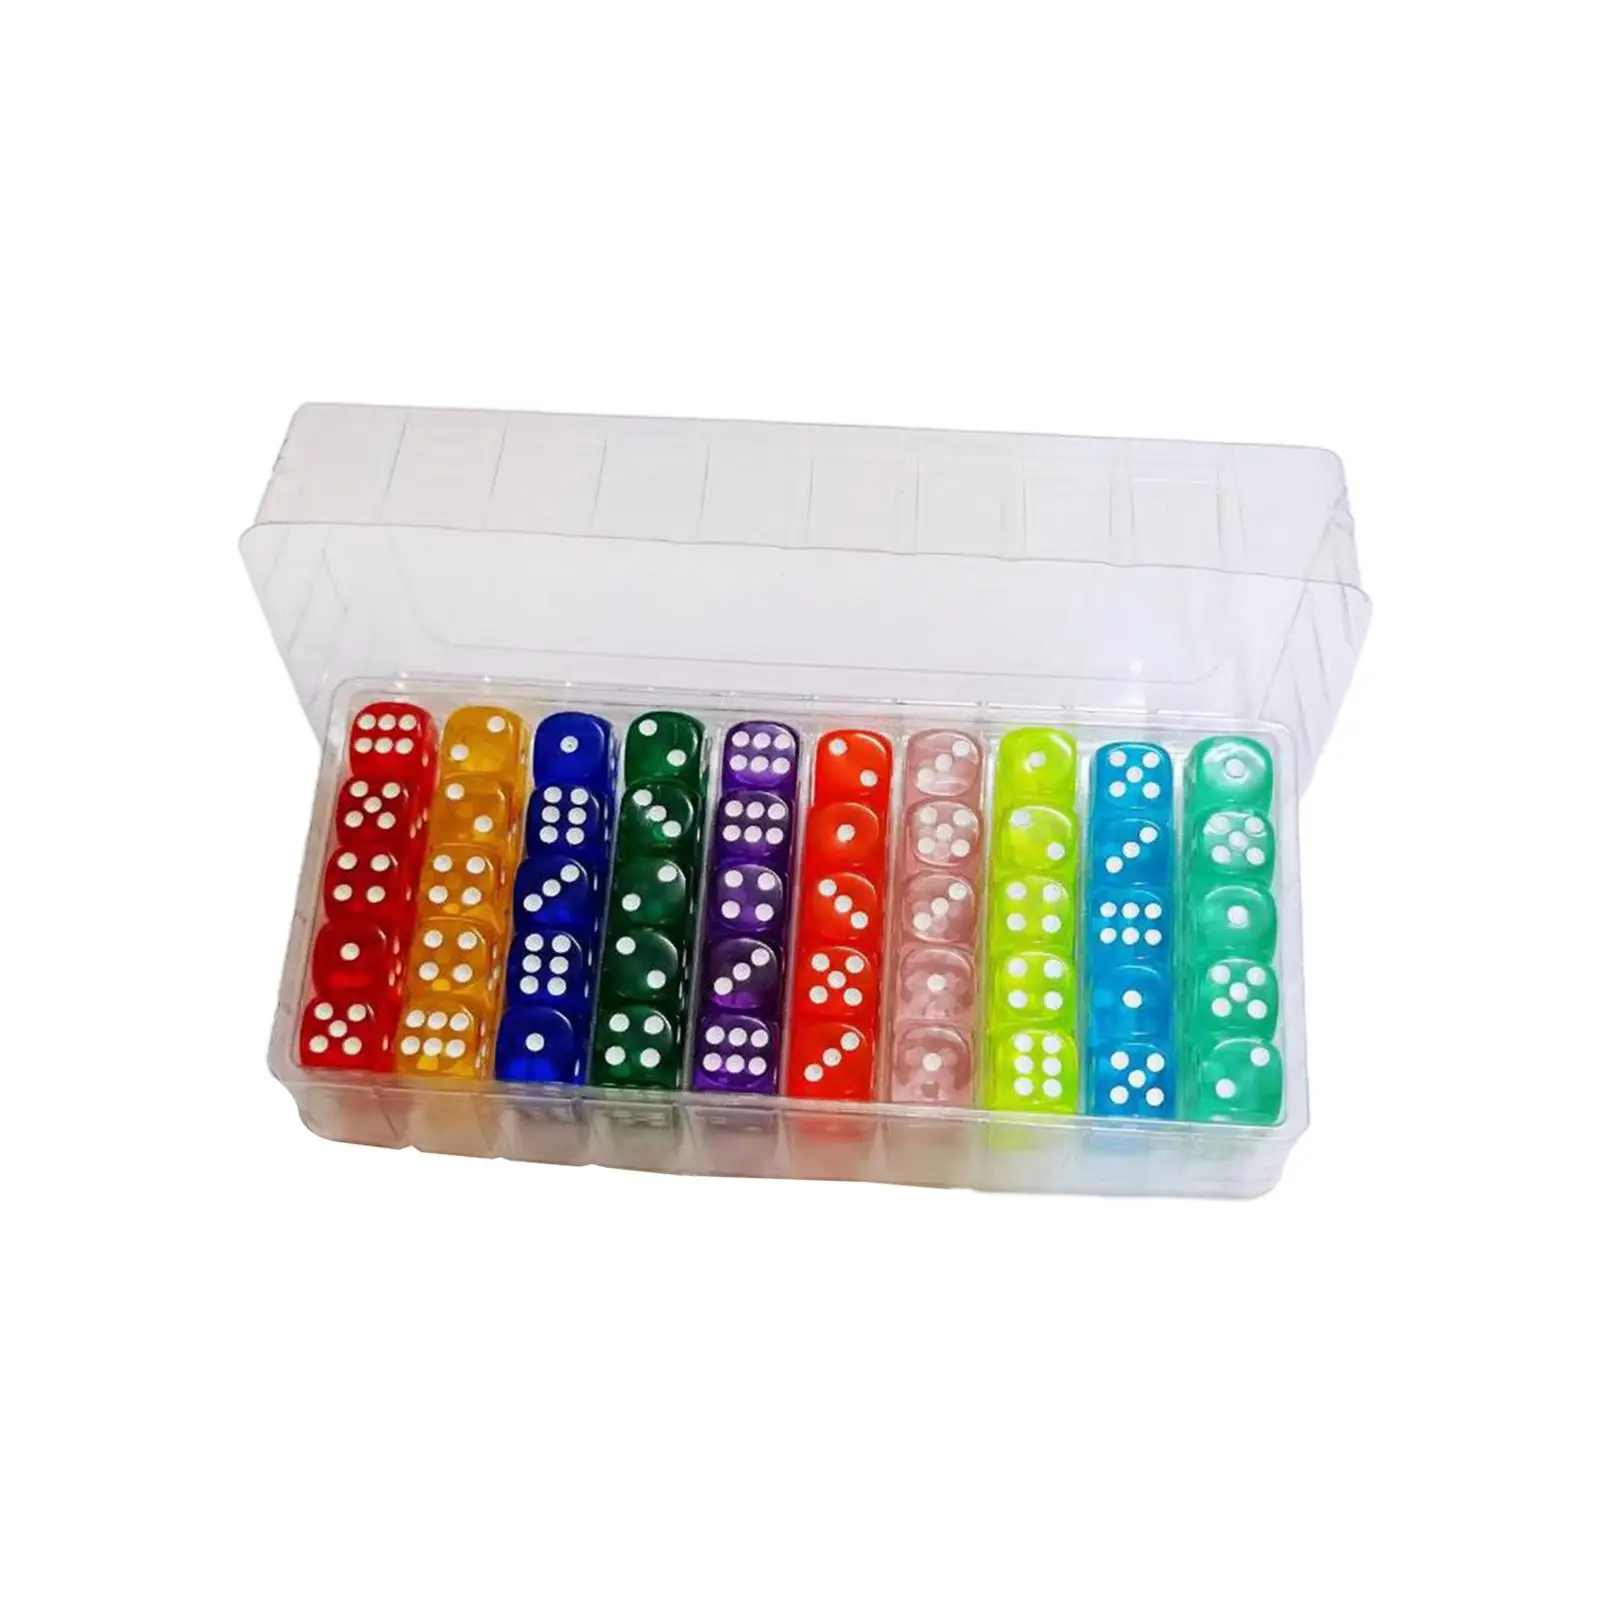 100Pcs 6 Sided Dice Set Translucent Colors Acrylic Dice Round Corner 14mm for